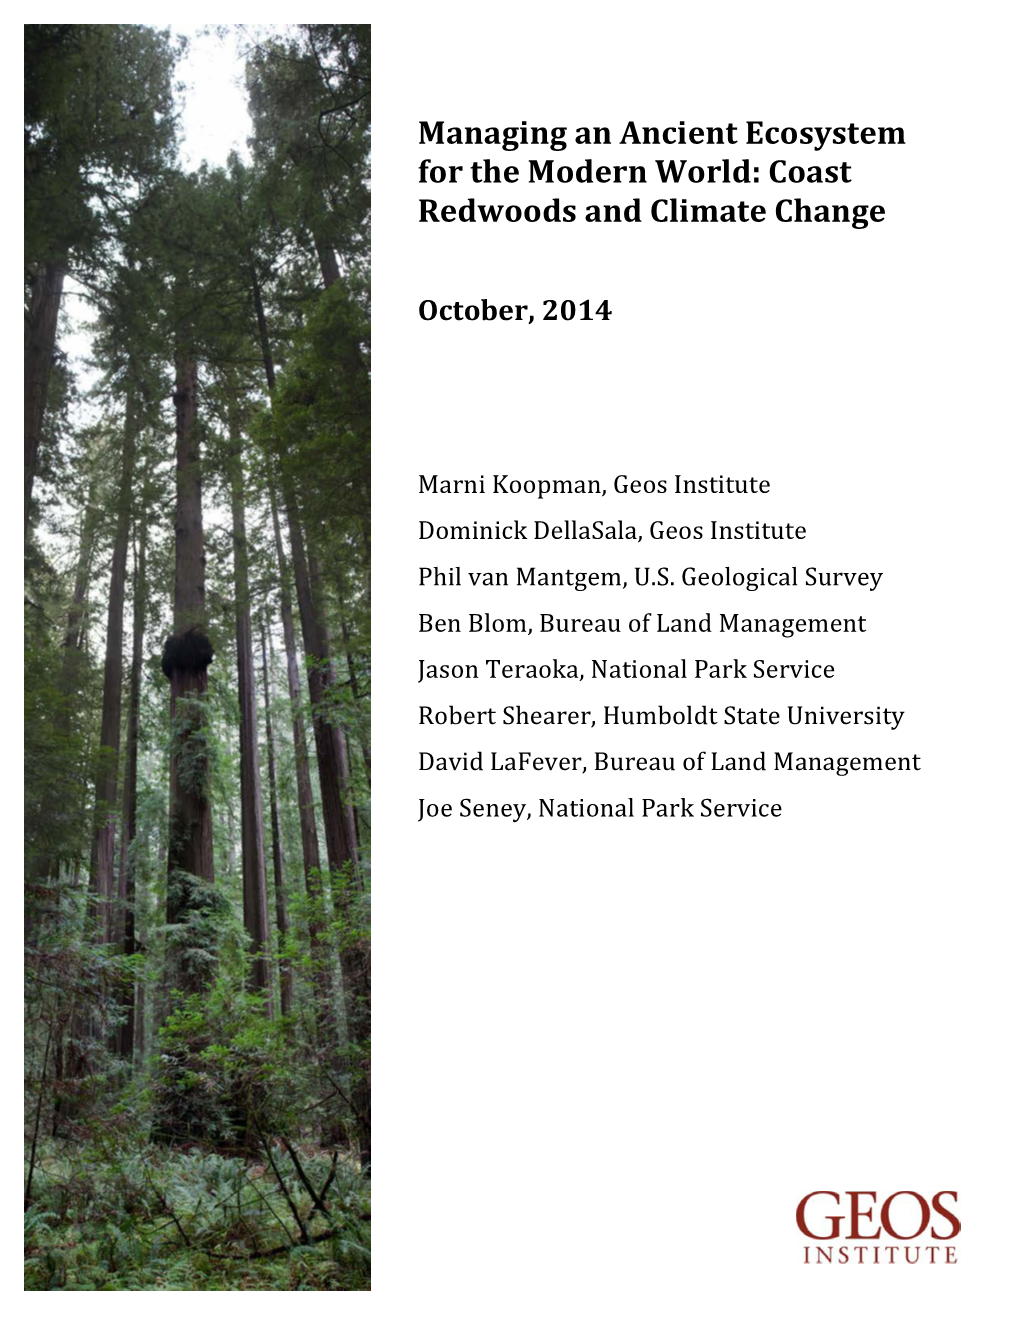 Coast Redwoods and Climate Change